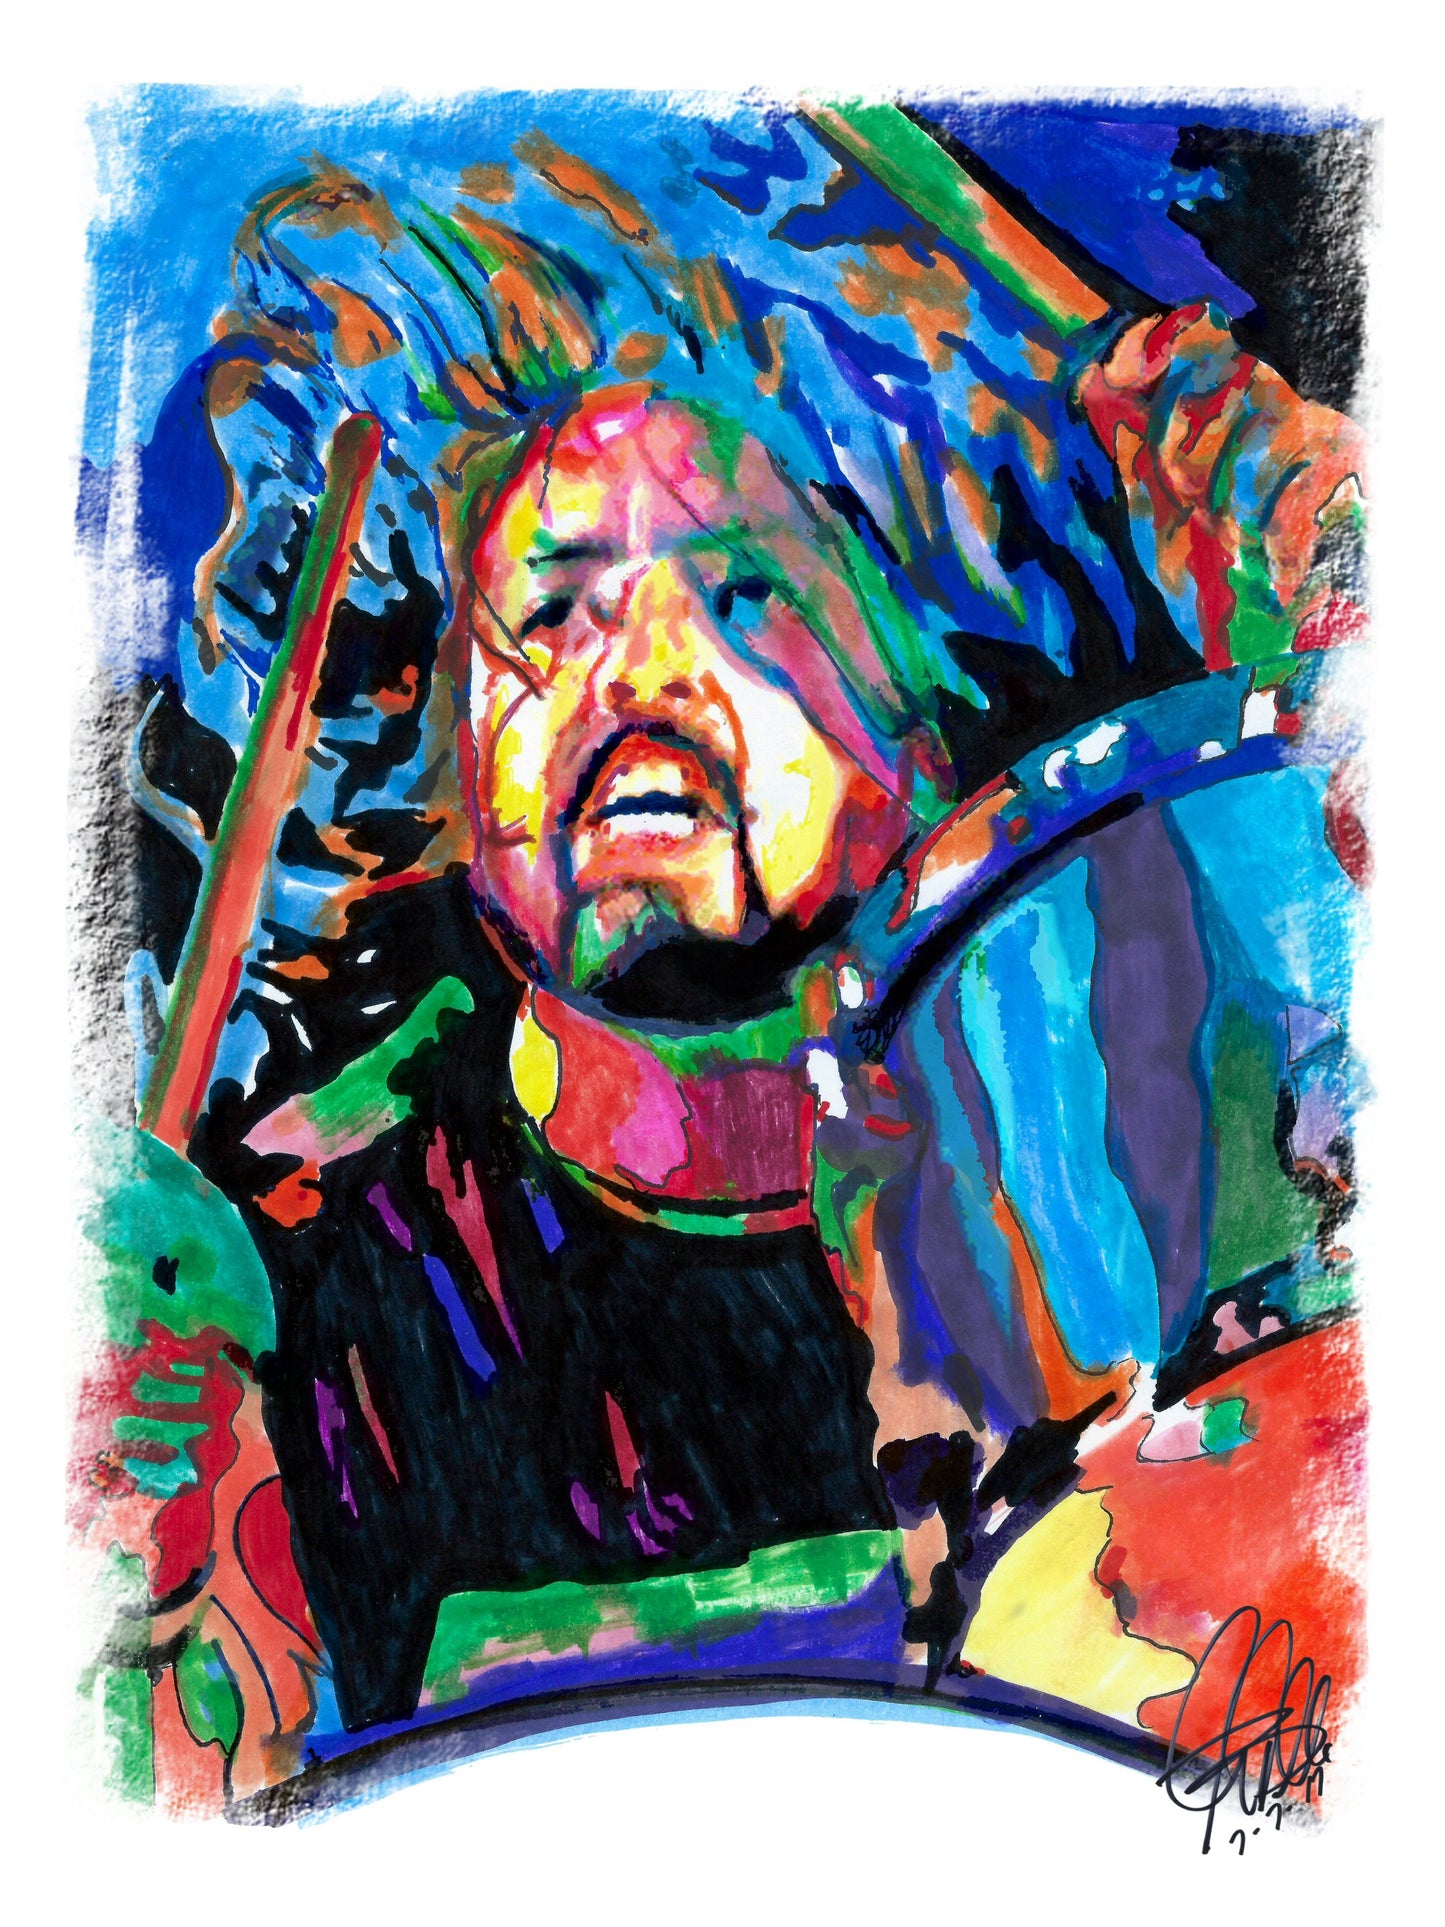 Dave Grohl Foo Fighters Rock Music Poster Print Wall Art 8.5x11